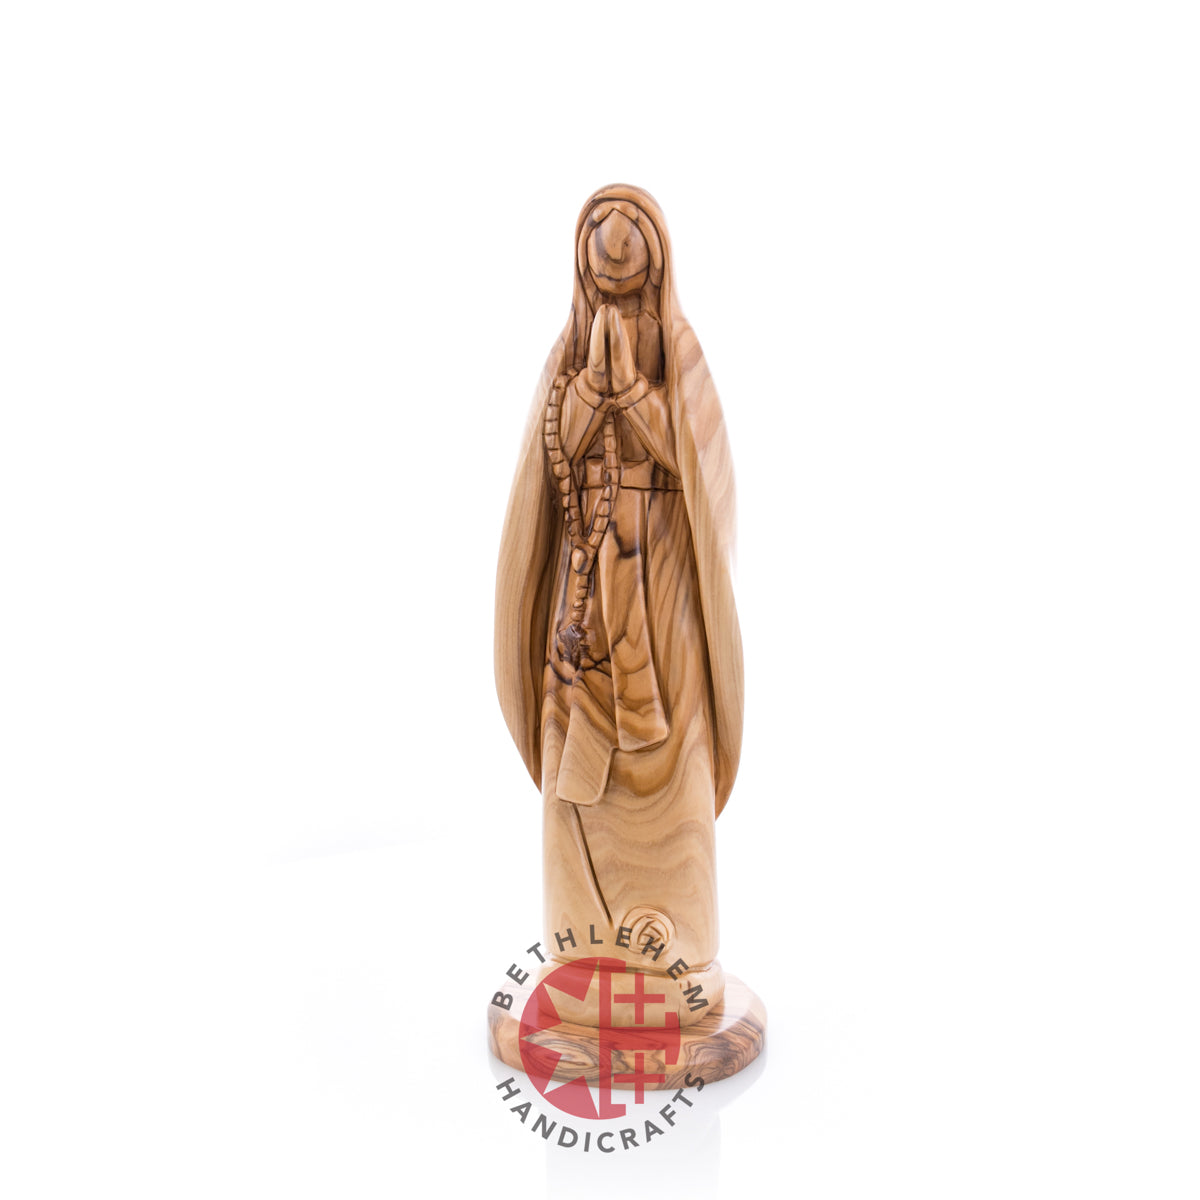 "Our Lady of Lourdes" Virgin Mary, 8.7" Olive Wood Statue